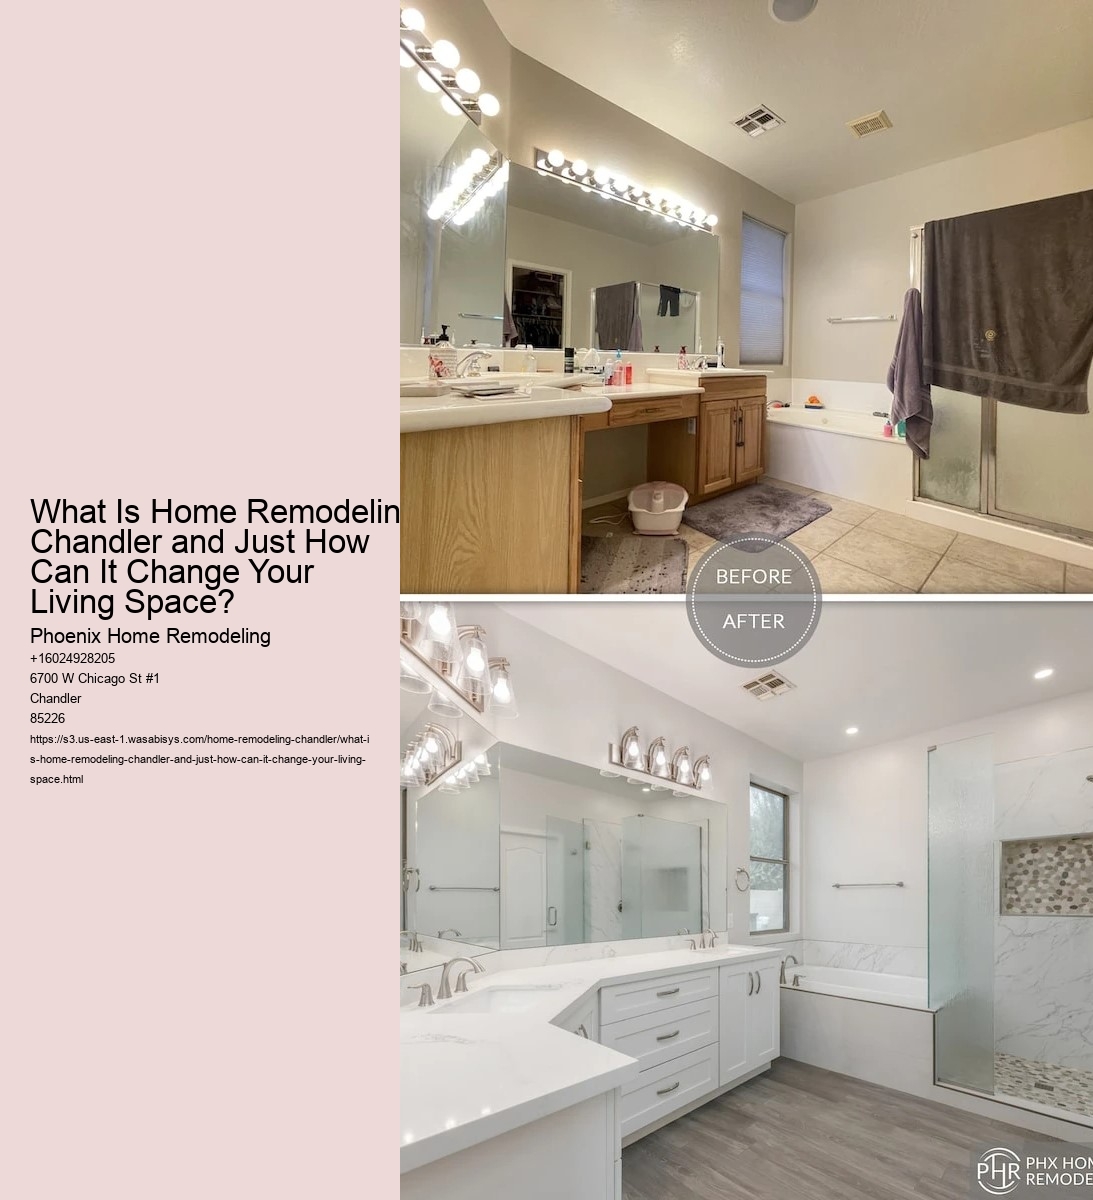 What Is Home Remodeling Chandler and Just How Can It Change Your Living Space?